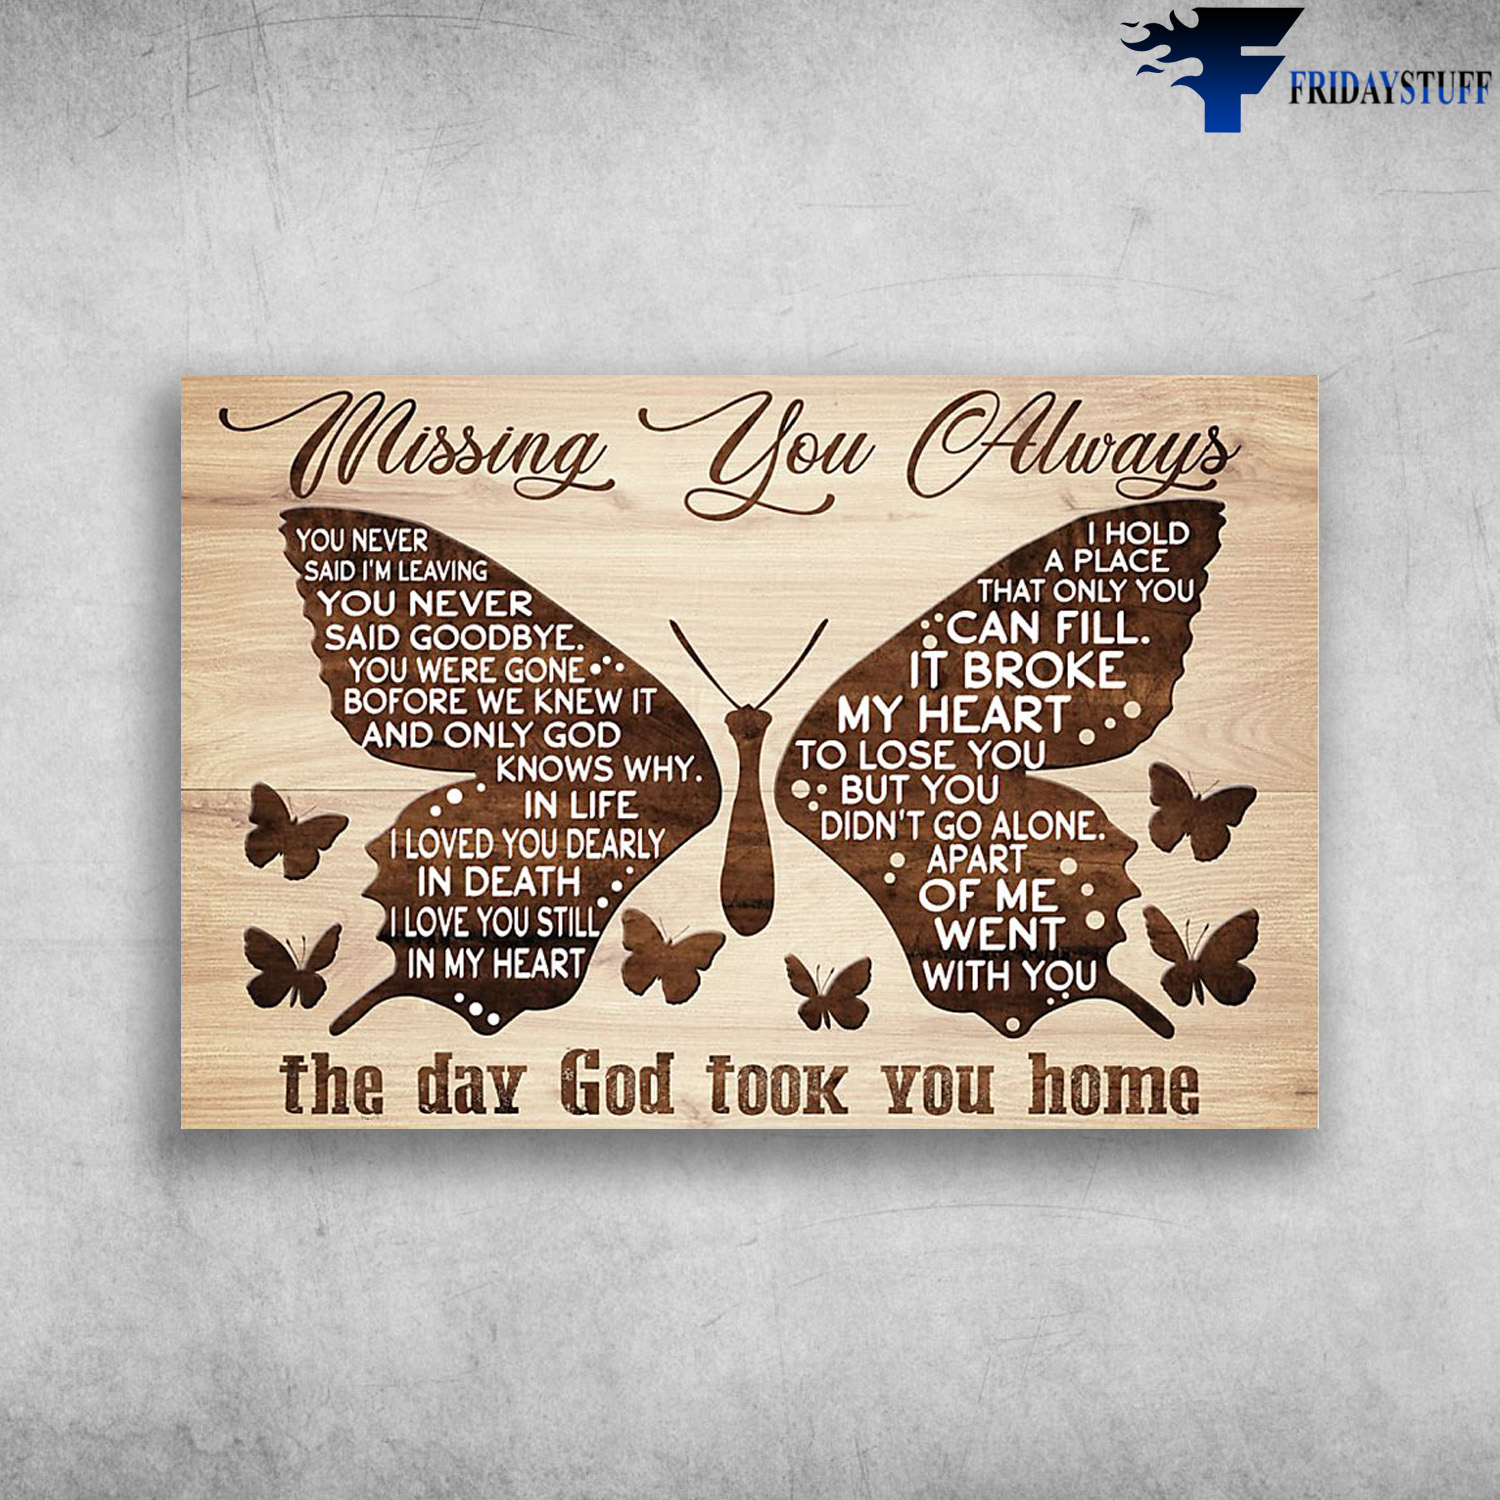 The Butterfly - Missing You Always, You Never Said I'm Leaving You Never Said Goodbye, You Were Gone Before We Knew It, And Only God Knows Why In Life, I Loved You Dearly In Death, I Love You Still In My Heart, The Day God Took You Home